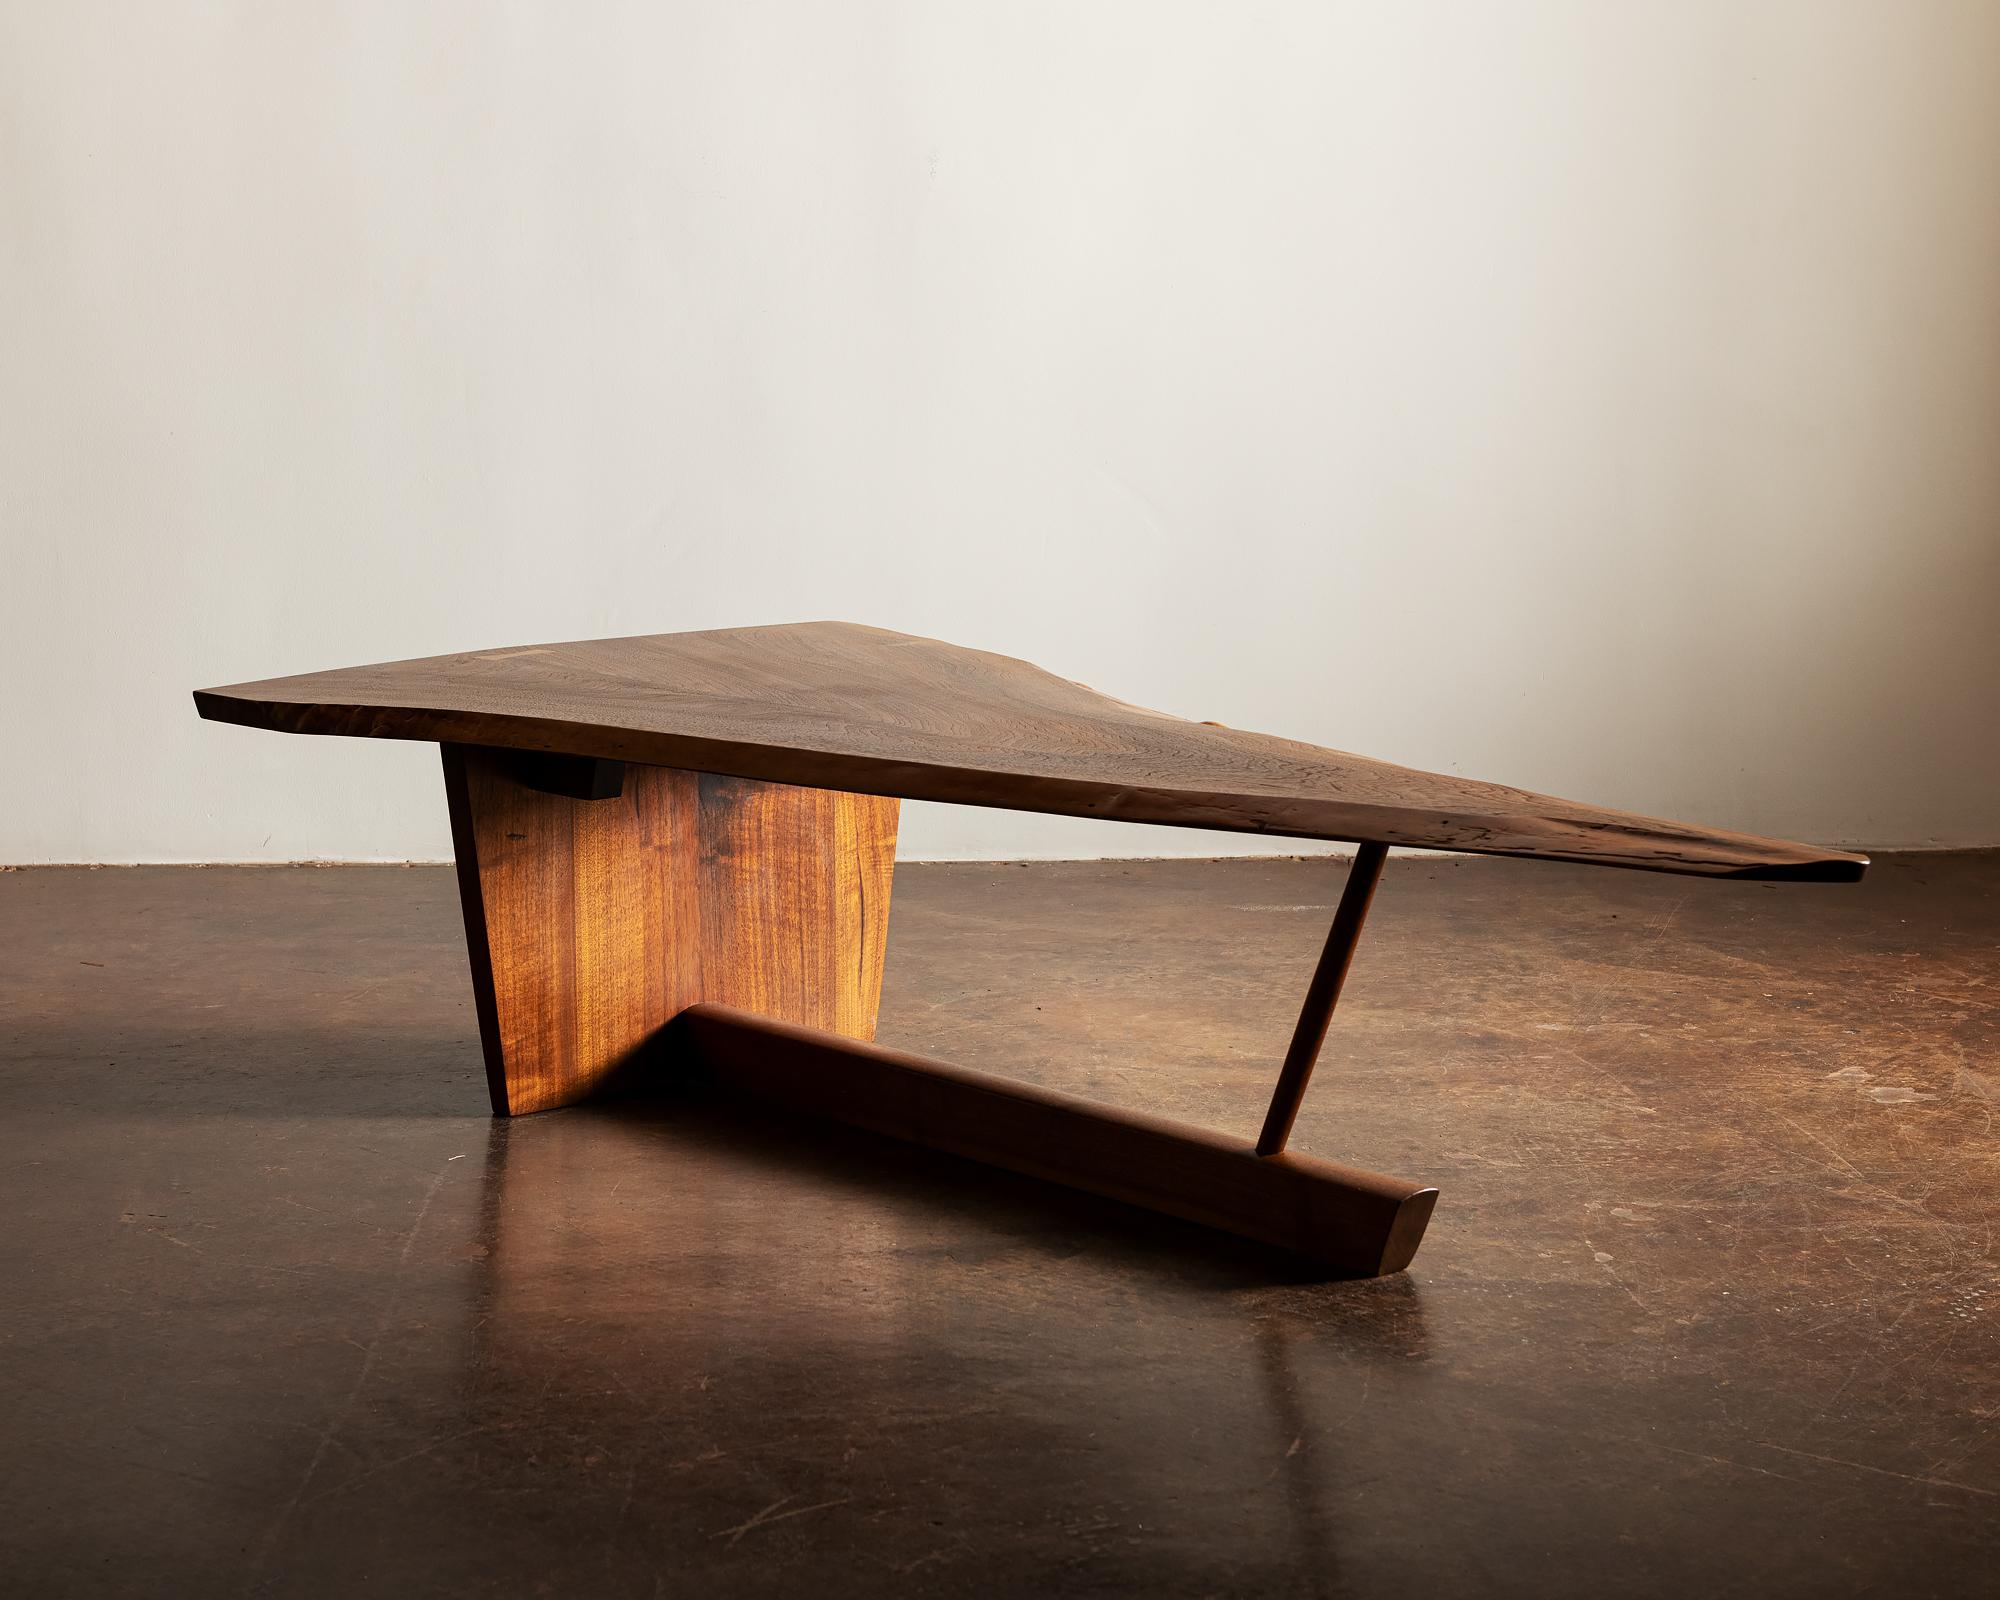 Stunning coffee table by George Nakashima, United States, 1980s. Studio example.

This table comes with a letter of authentication from Mira Nakashima of Nakashima Woodworkers in New Hope, PA.